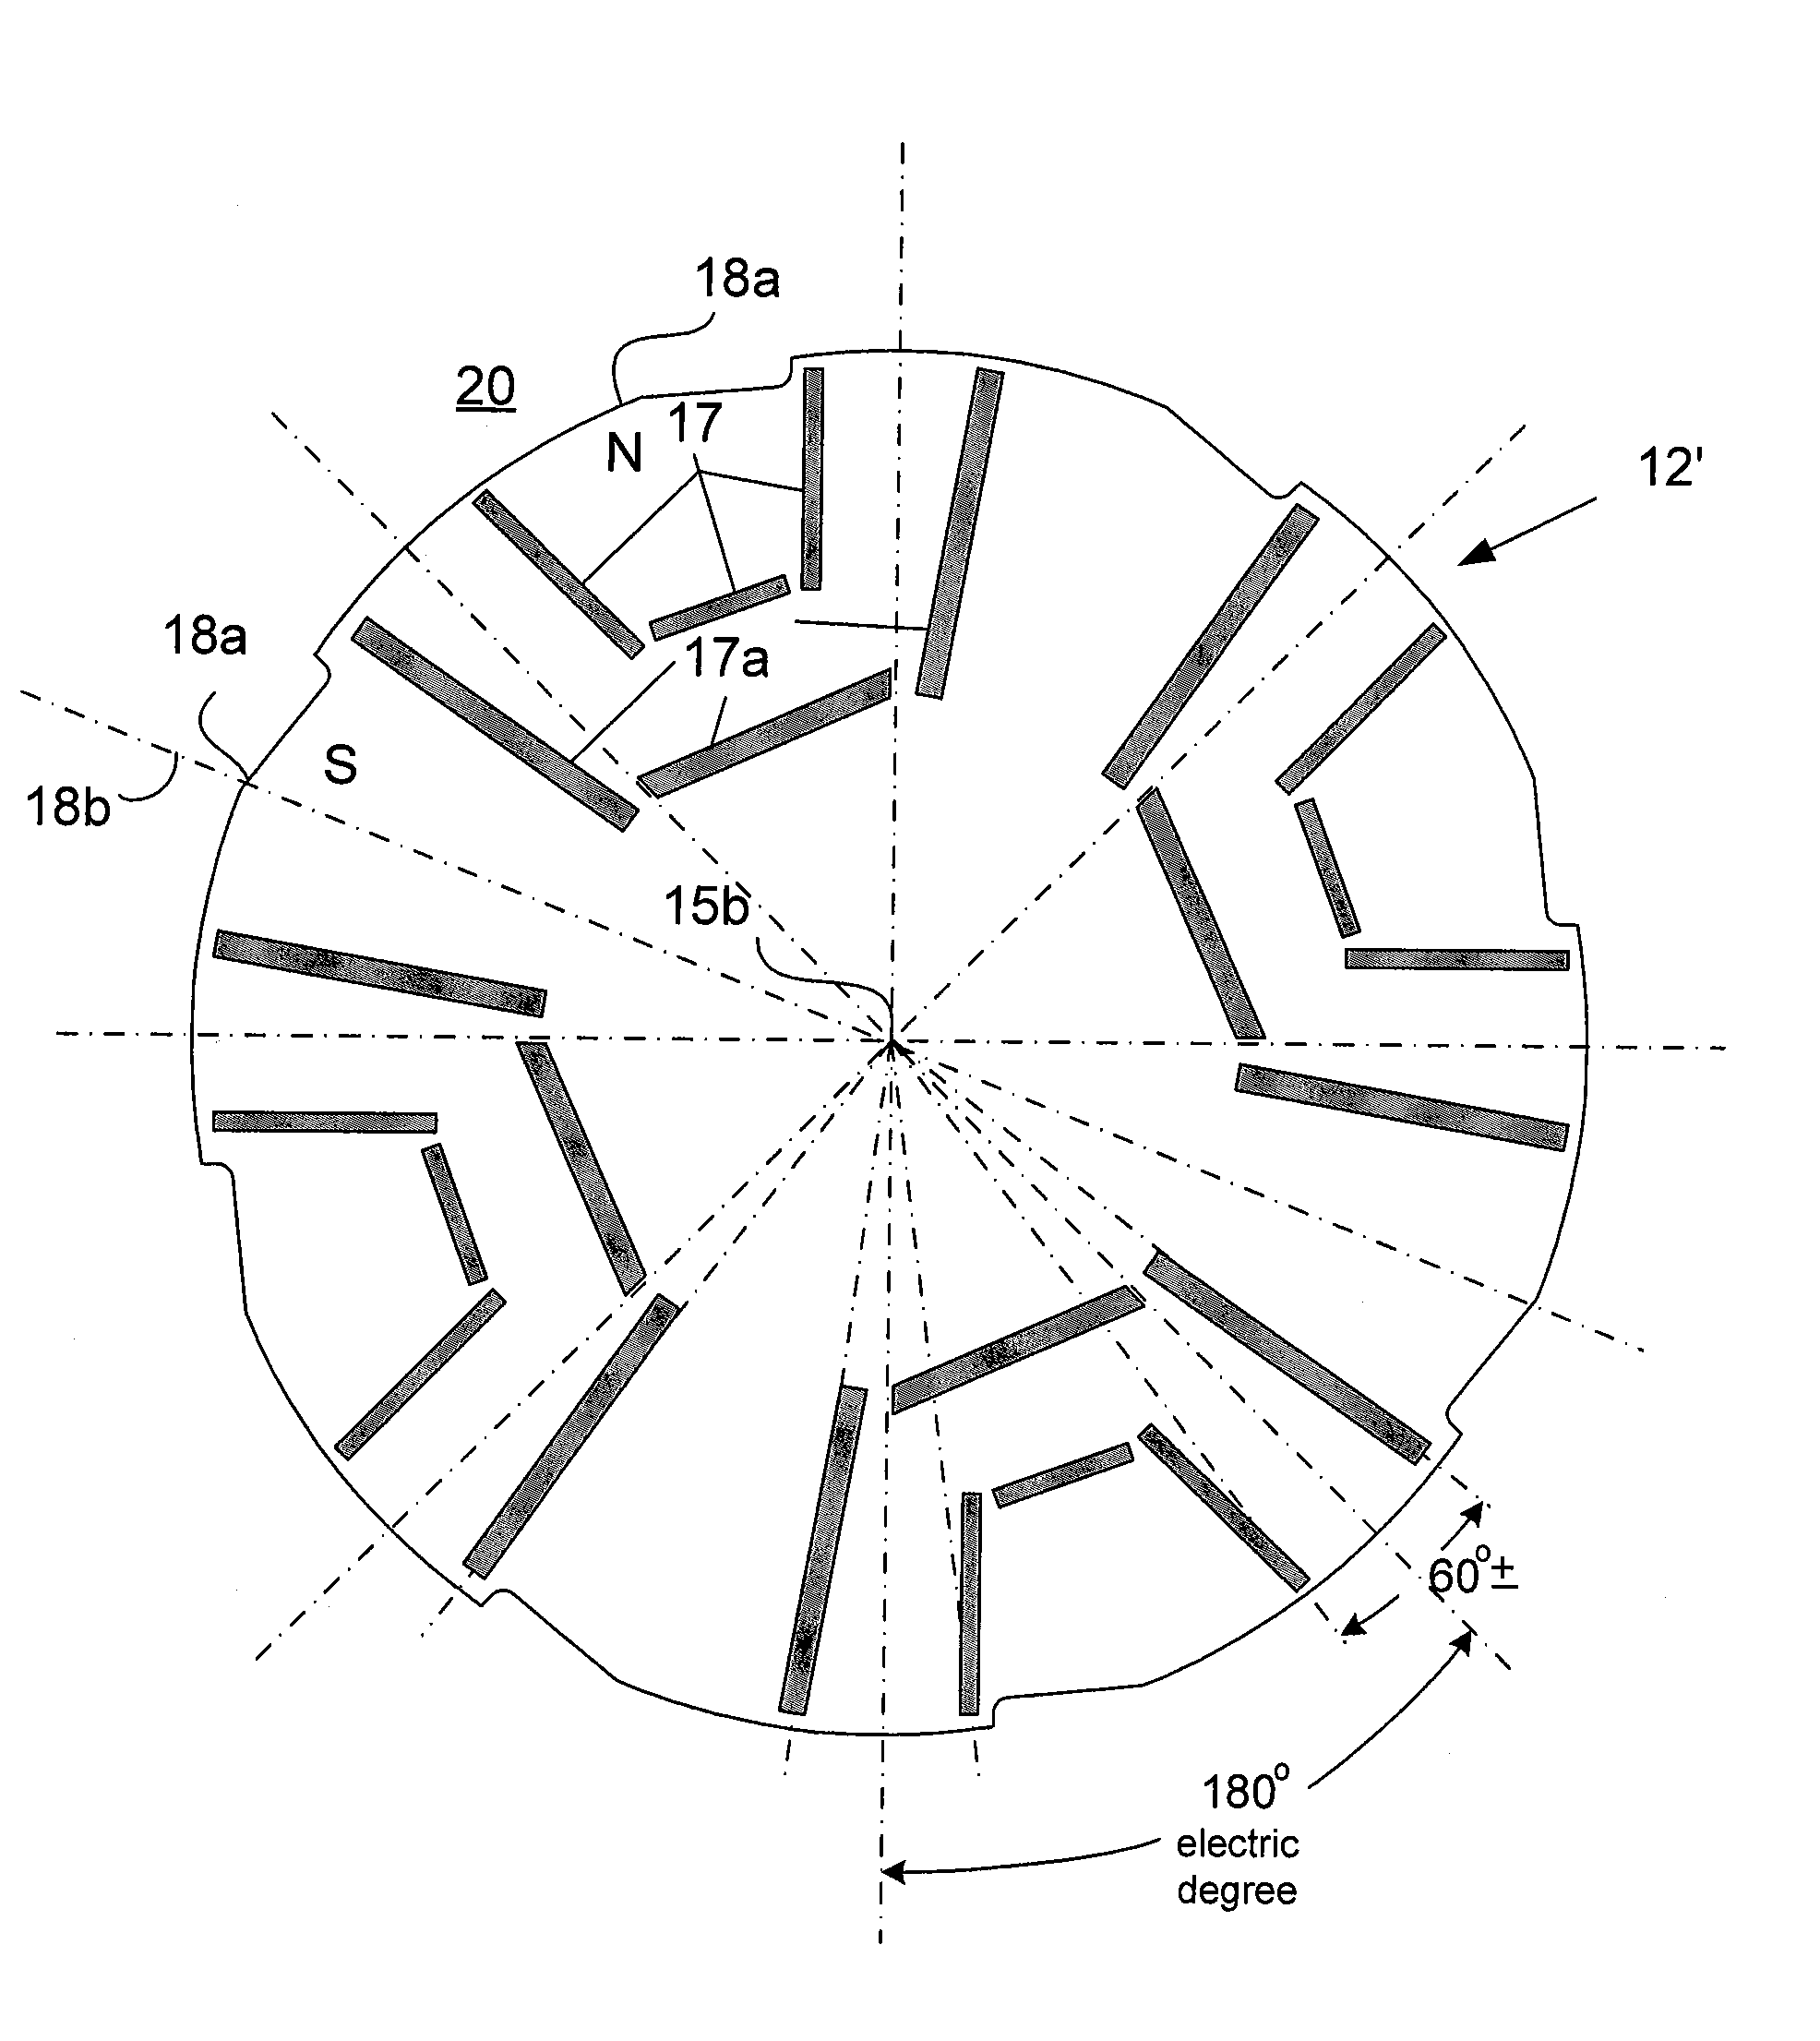 Permanent magnet machine and method with reluctance poles and non-identical PM poles for high density operation